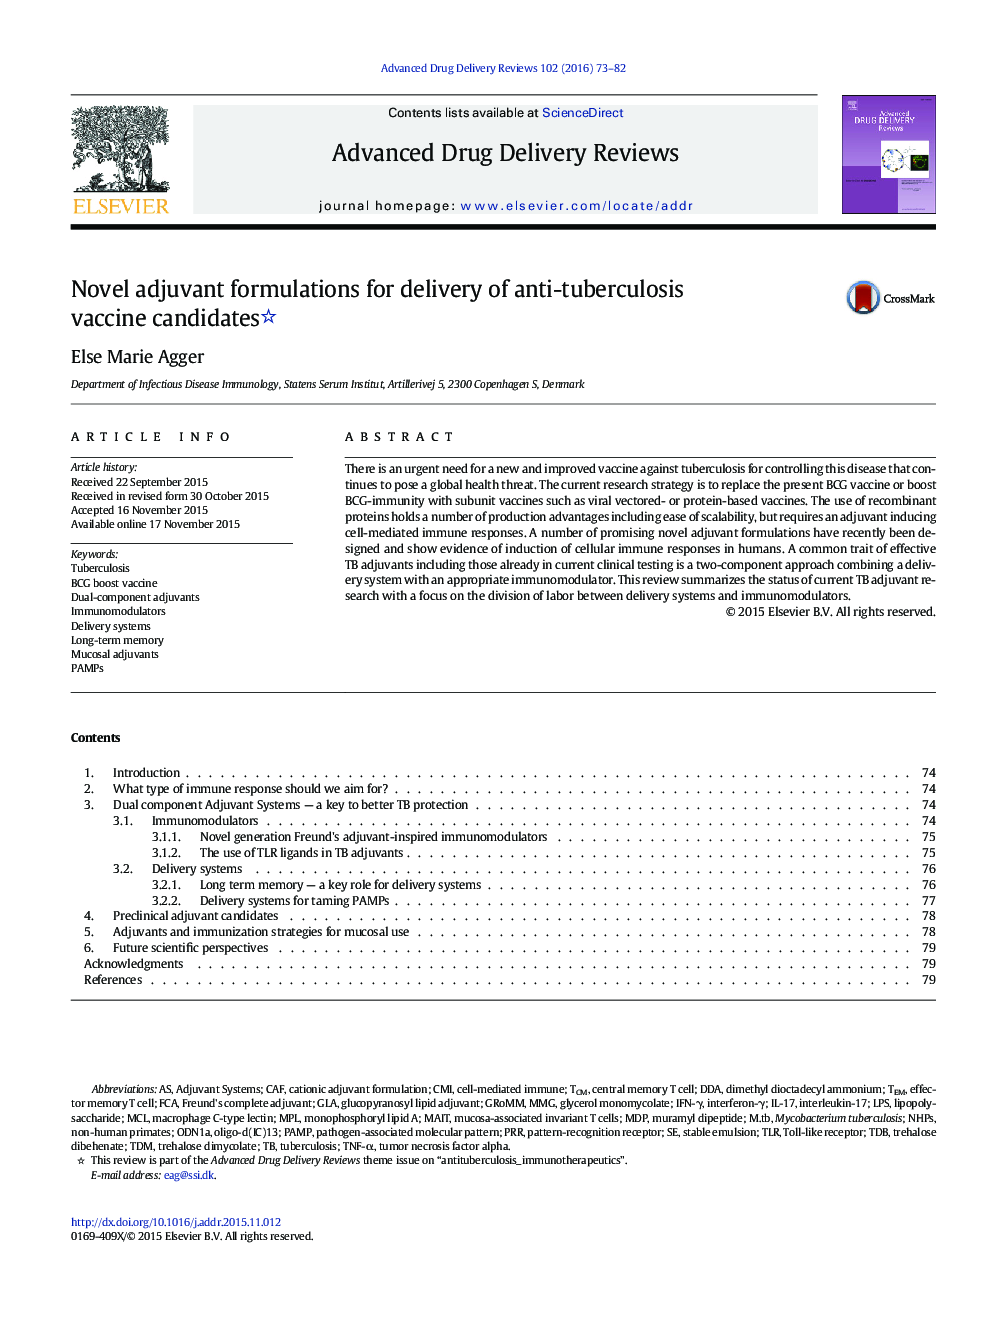 Novel adjuvant formulations for delivery of anti-tuberculosis vaccine candidates